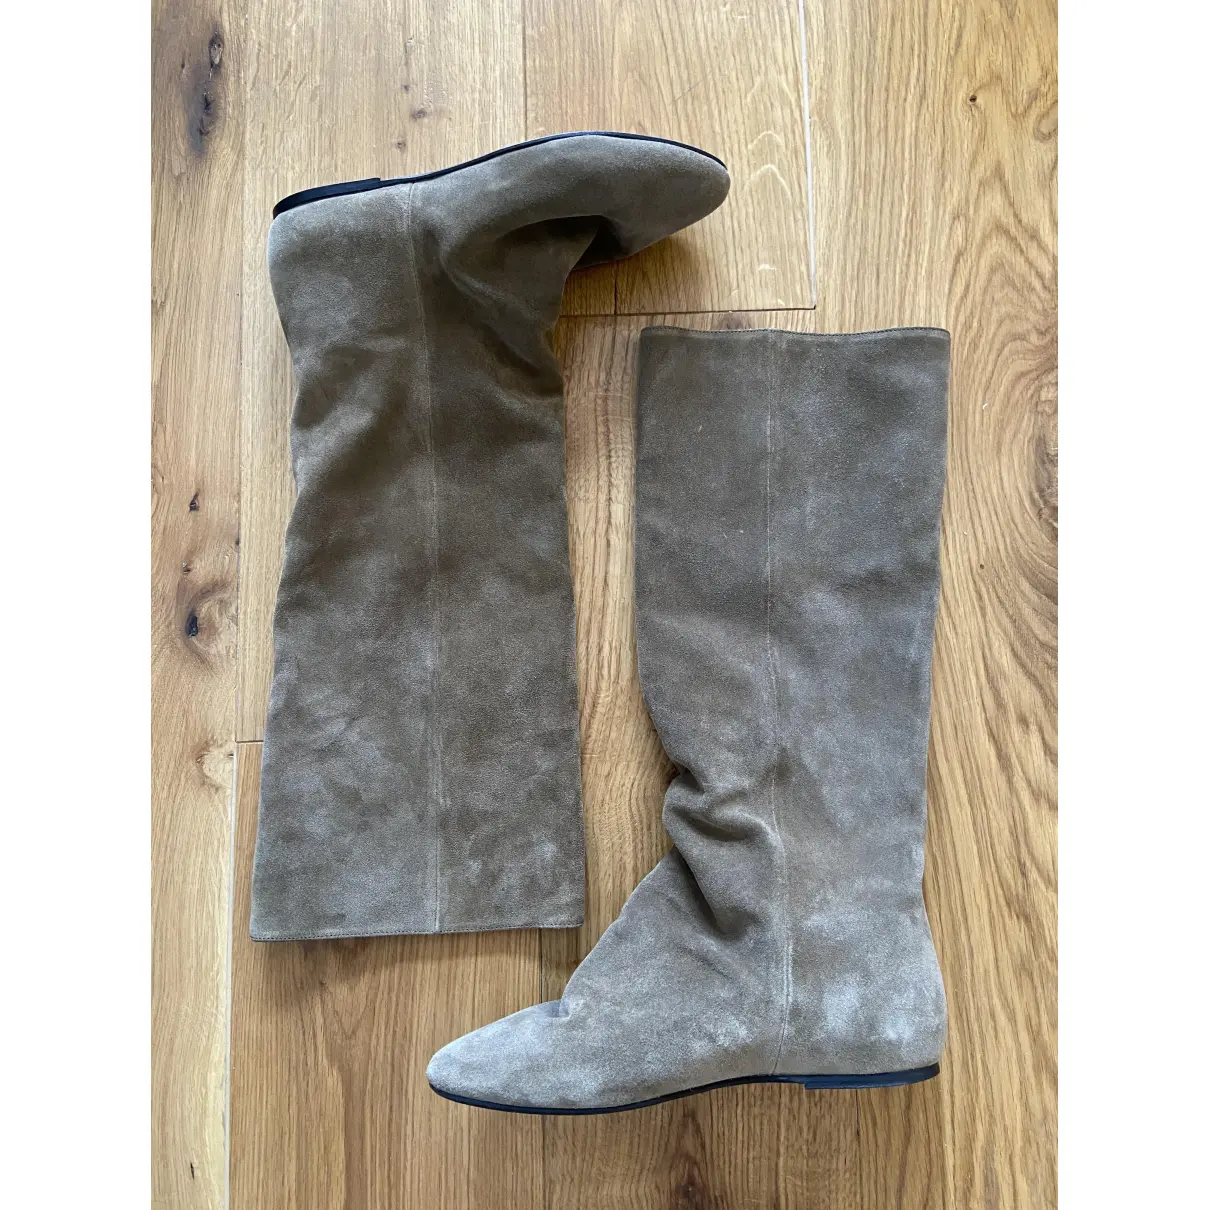 Buy Isabel Marant Riding boots online